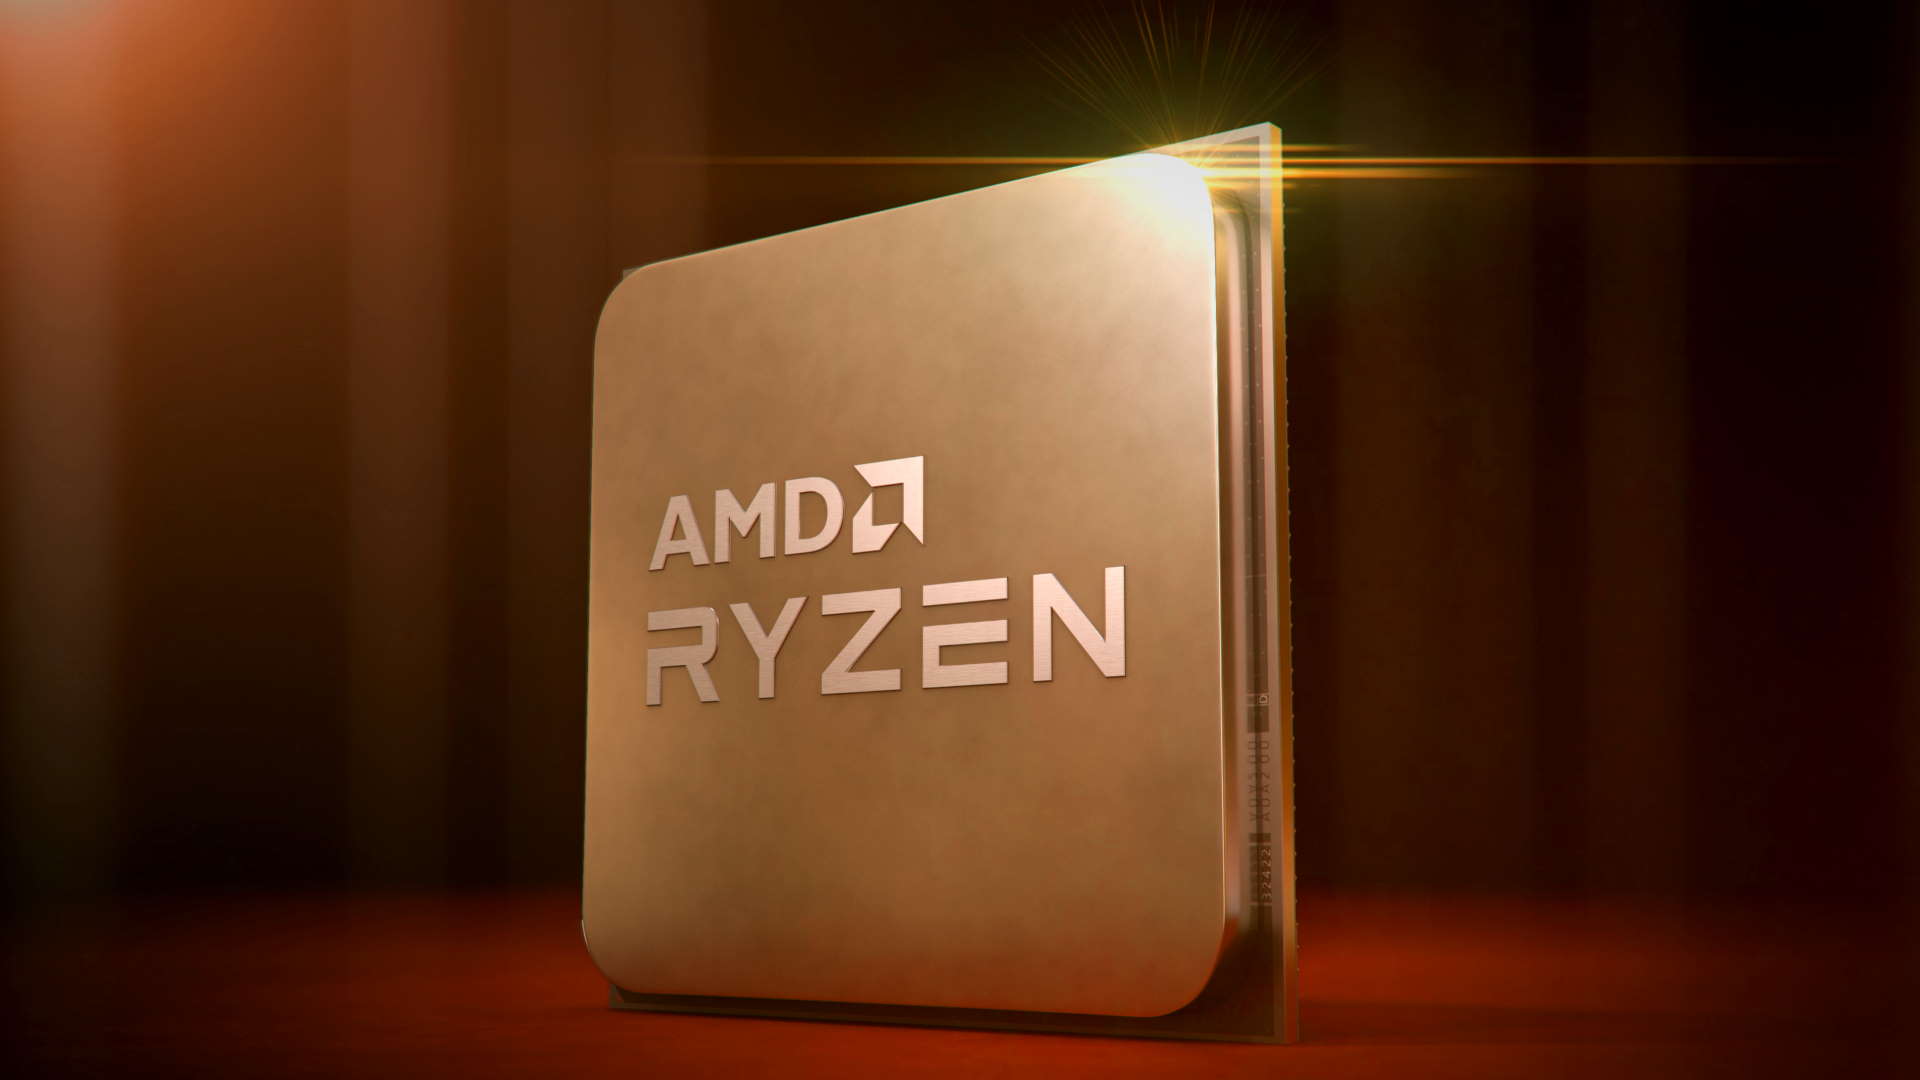  The fixes for the Windows 11 bugs that were hurting AMD Ryzen performance are now live 